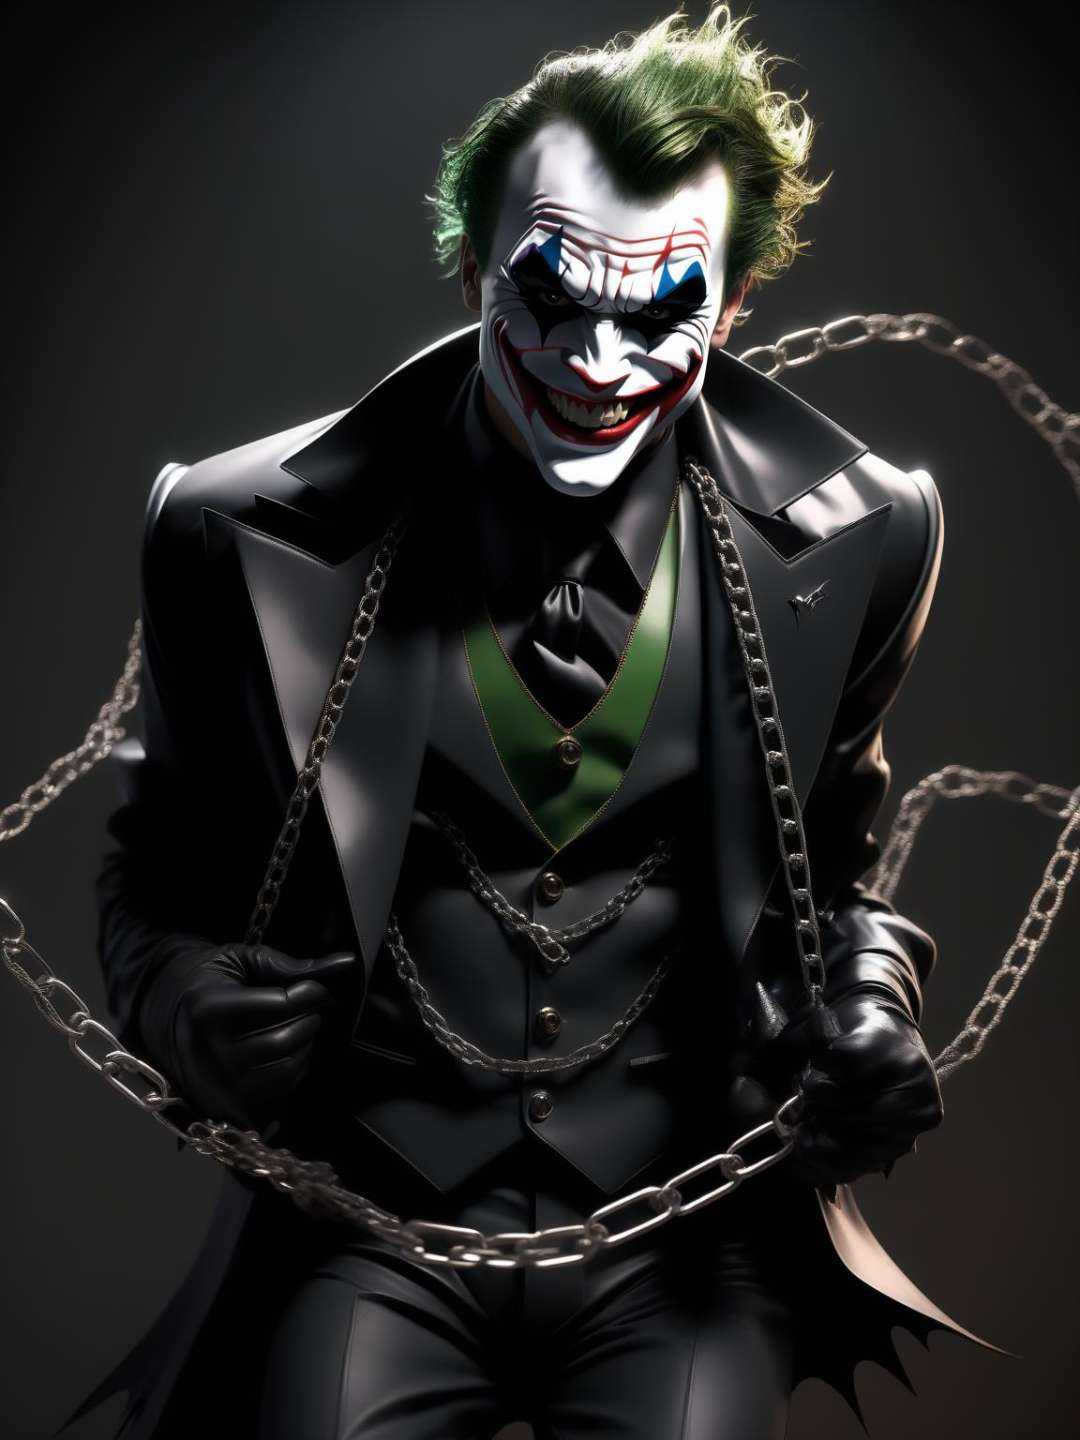 (joker in punk style batman suit), grin from ear to ear, showing sharp teeth, surreal image with chains flying around, skinny body and tight black bdsm suit, scene dark with simple black background, 8k, hd, high quality, high detail, perfect hands, 